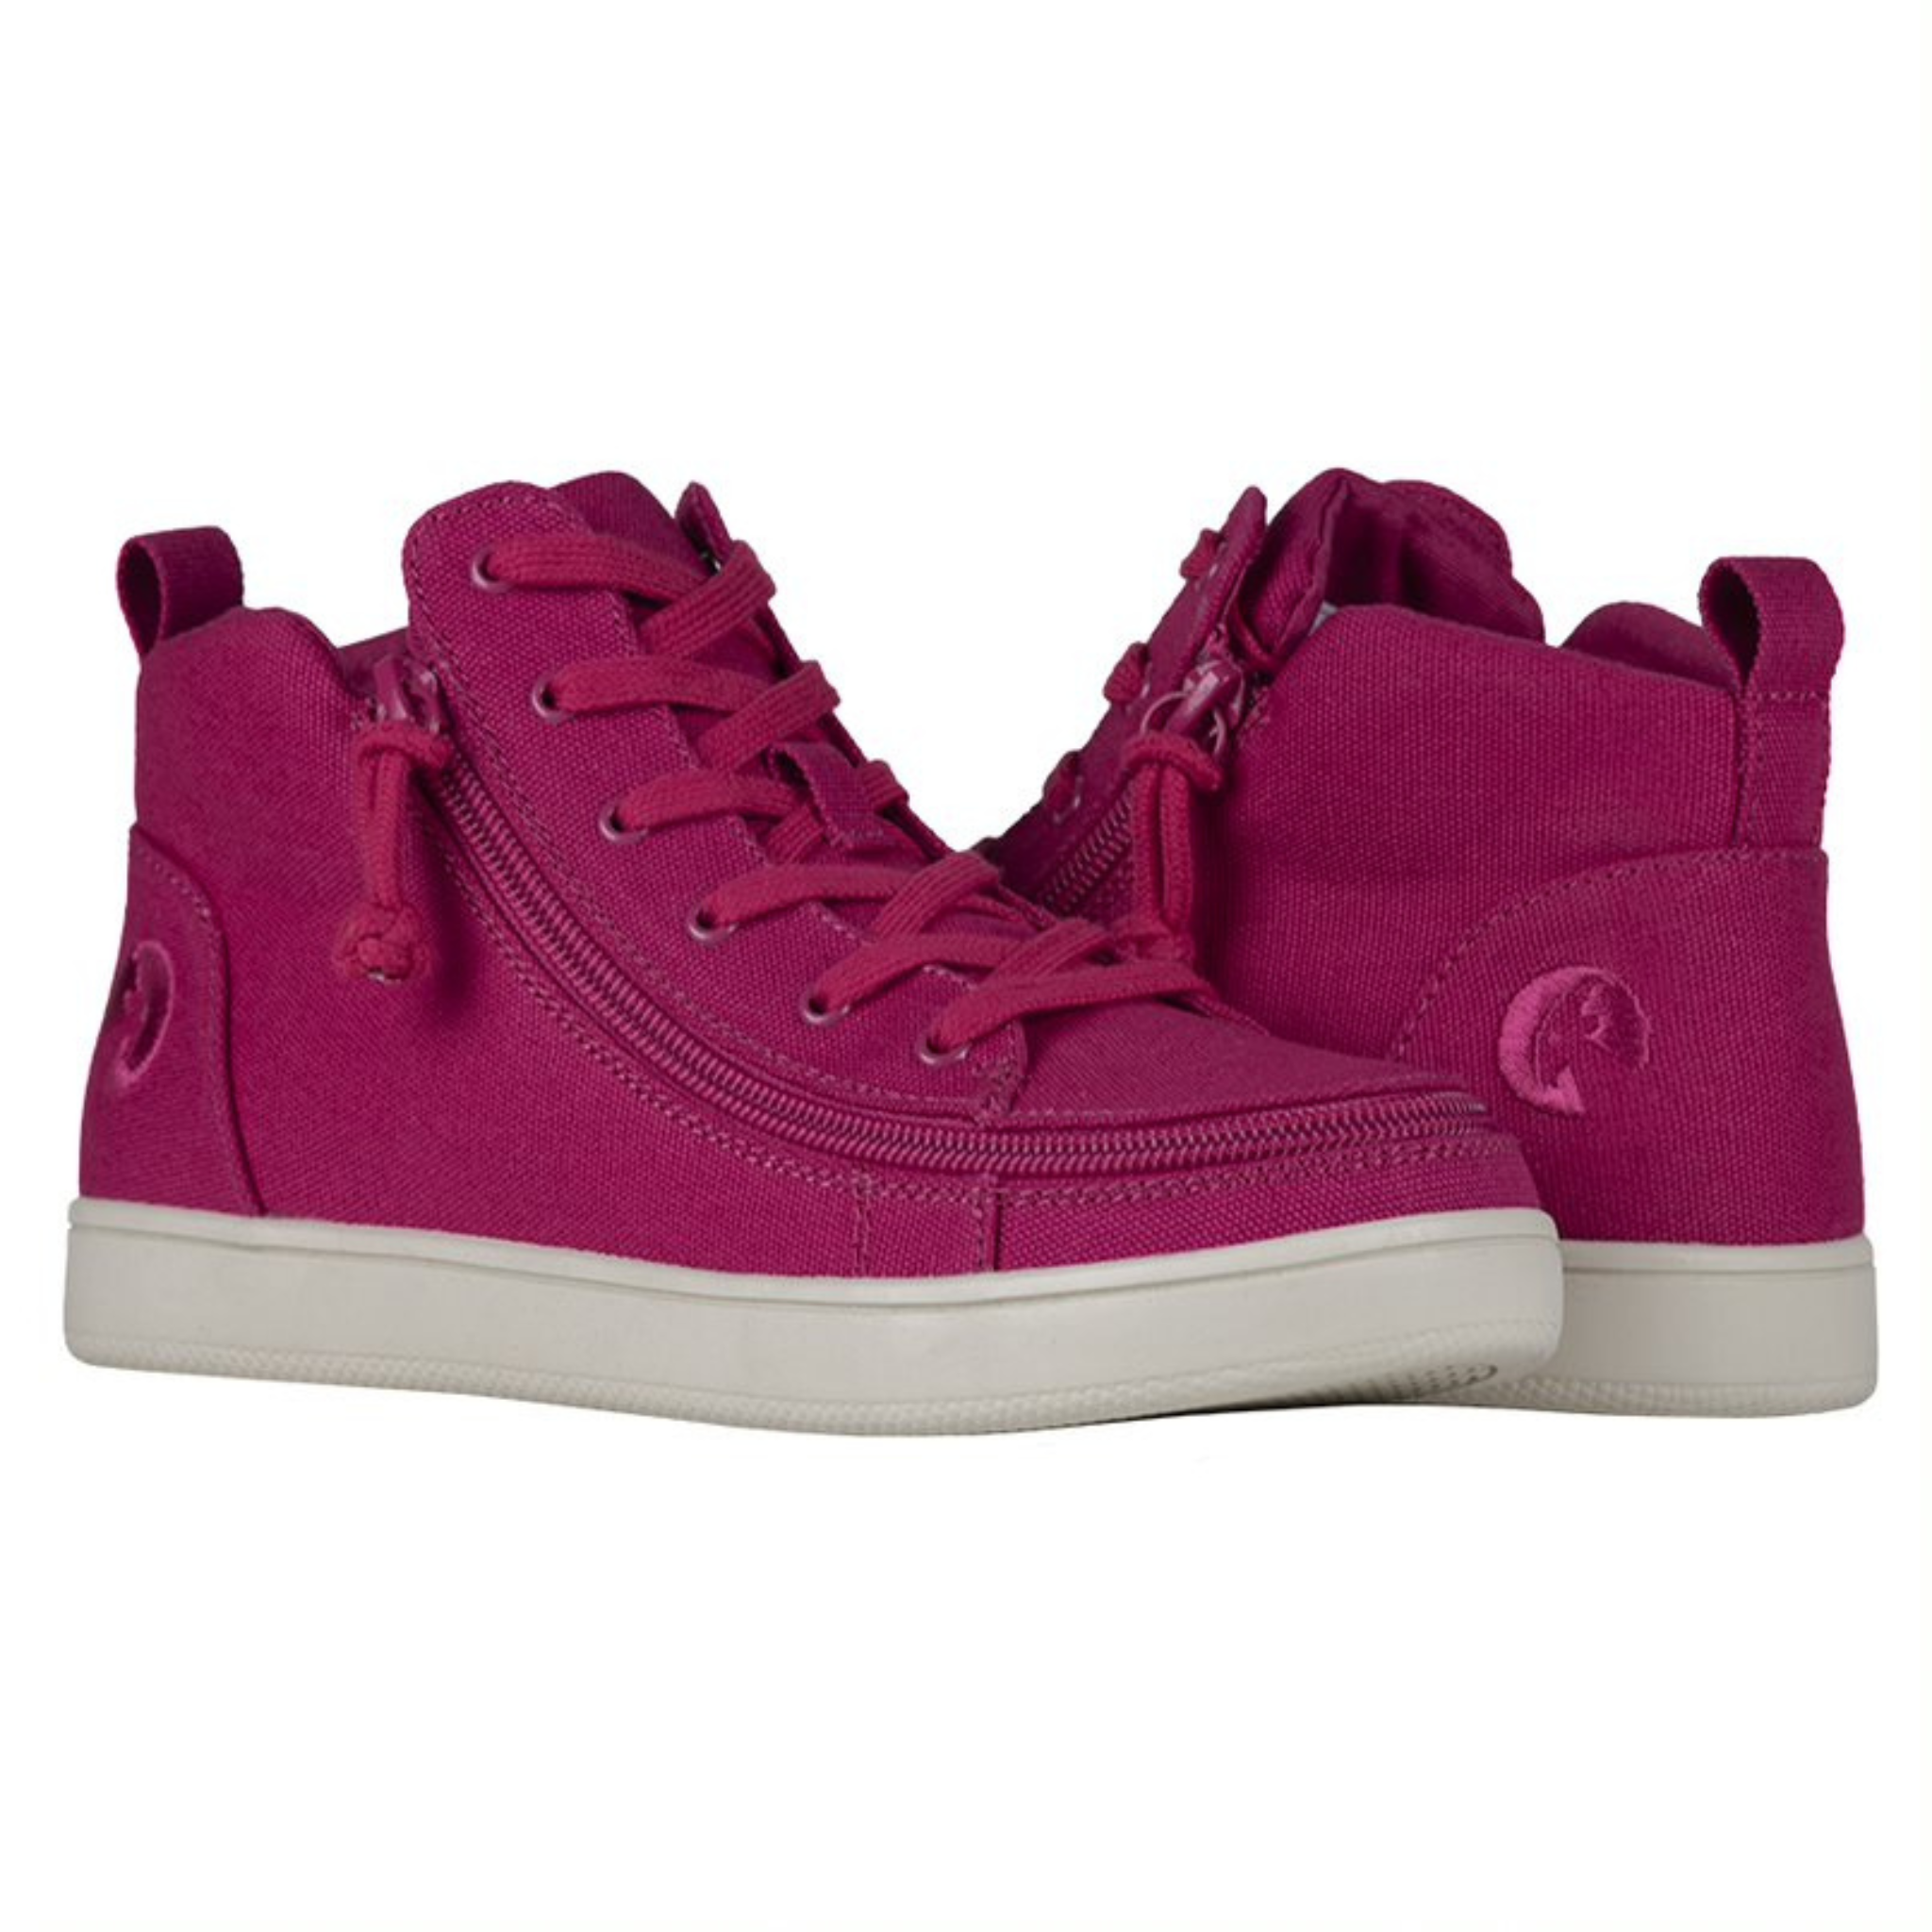 Billy Footwear (Womens) - Mid Top Canvas Orchid Flower Shoes